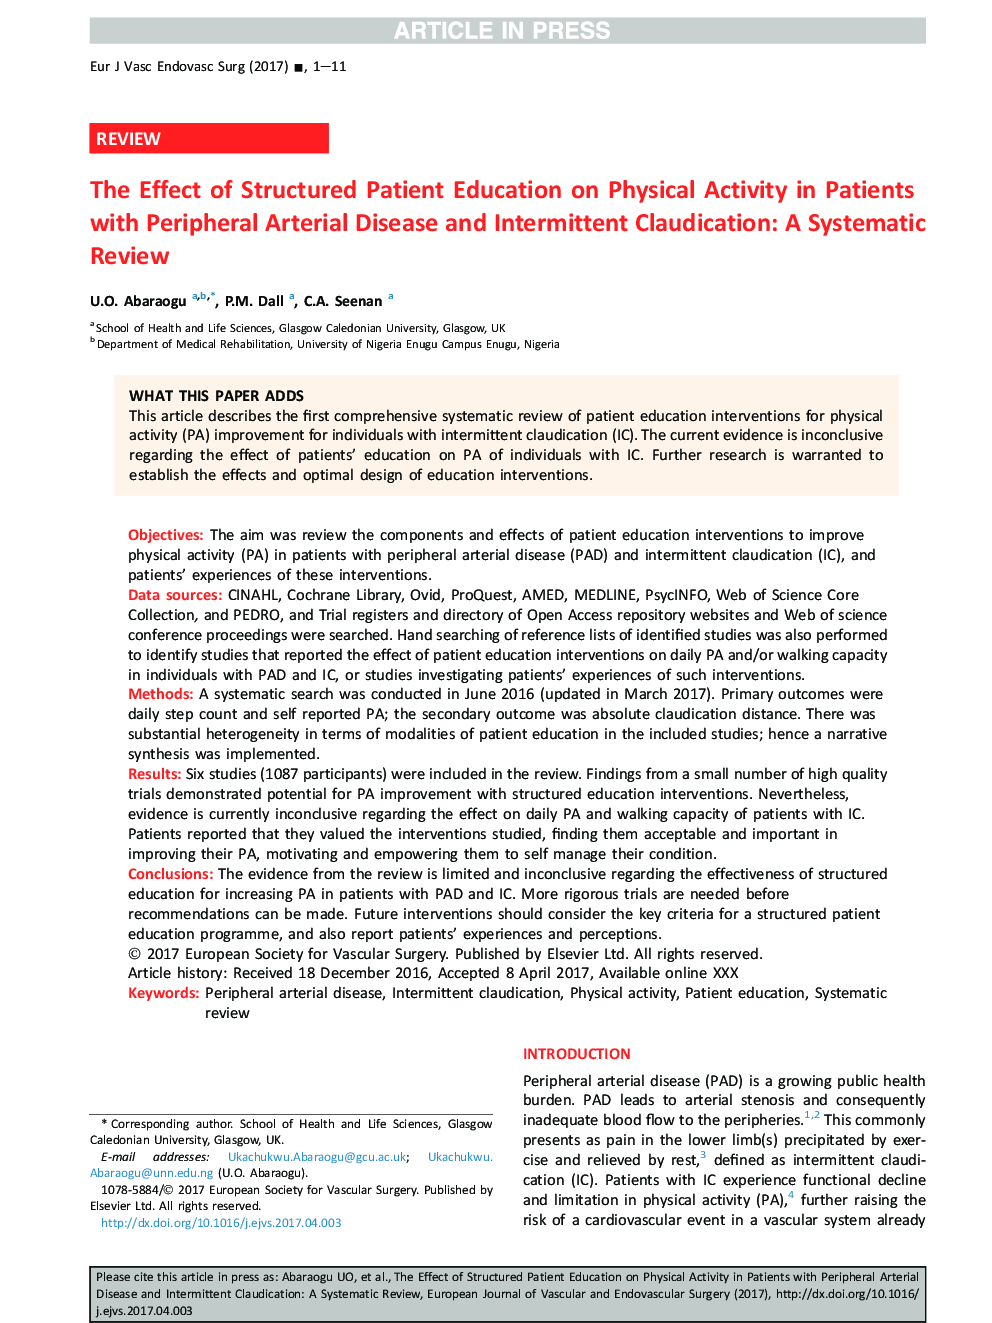 The Effect of Structured Patient Education on Physical Activity in Patients with Peripheral Arterial Disease and Intermittent Claudication: A Systematic Review